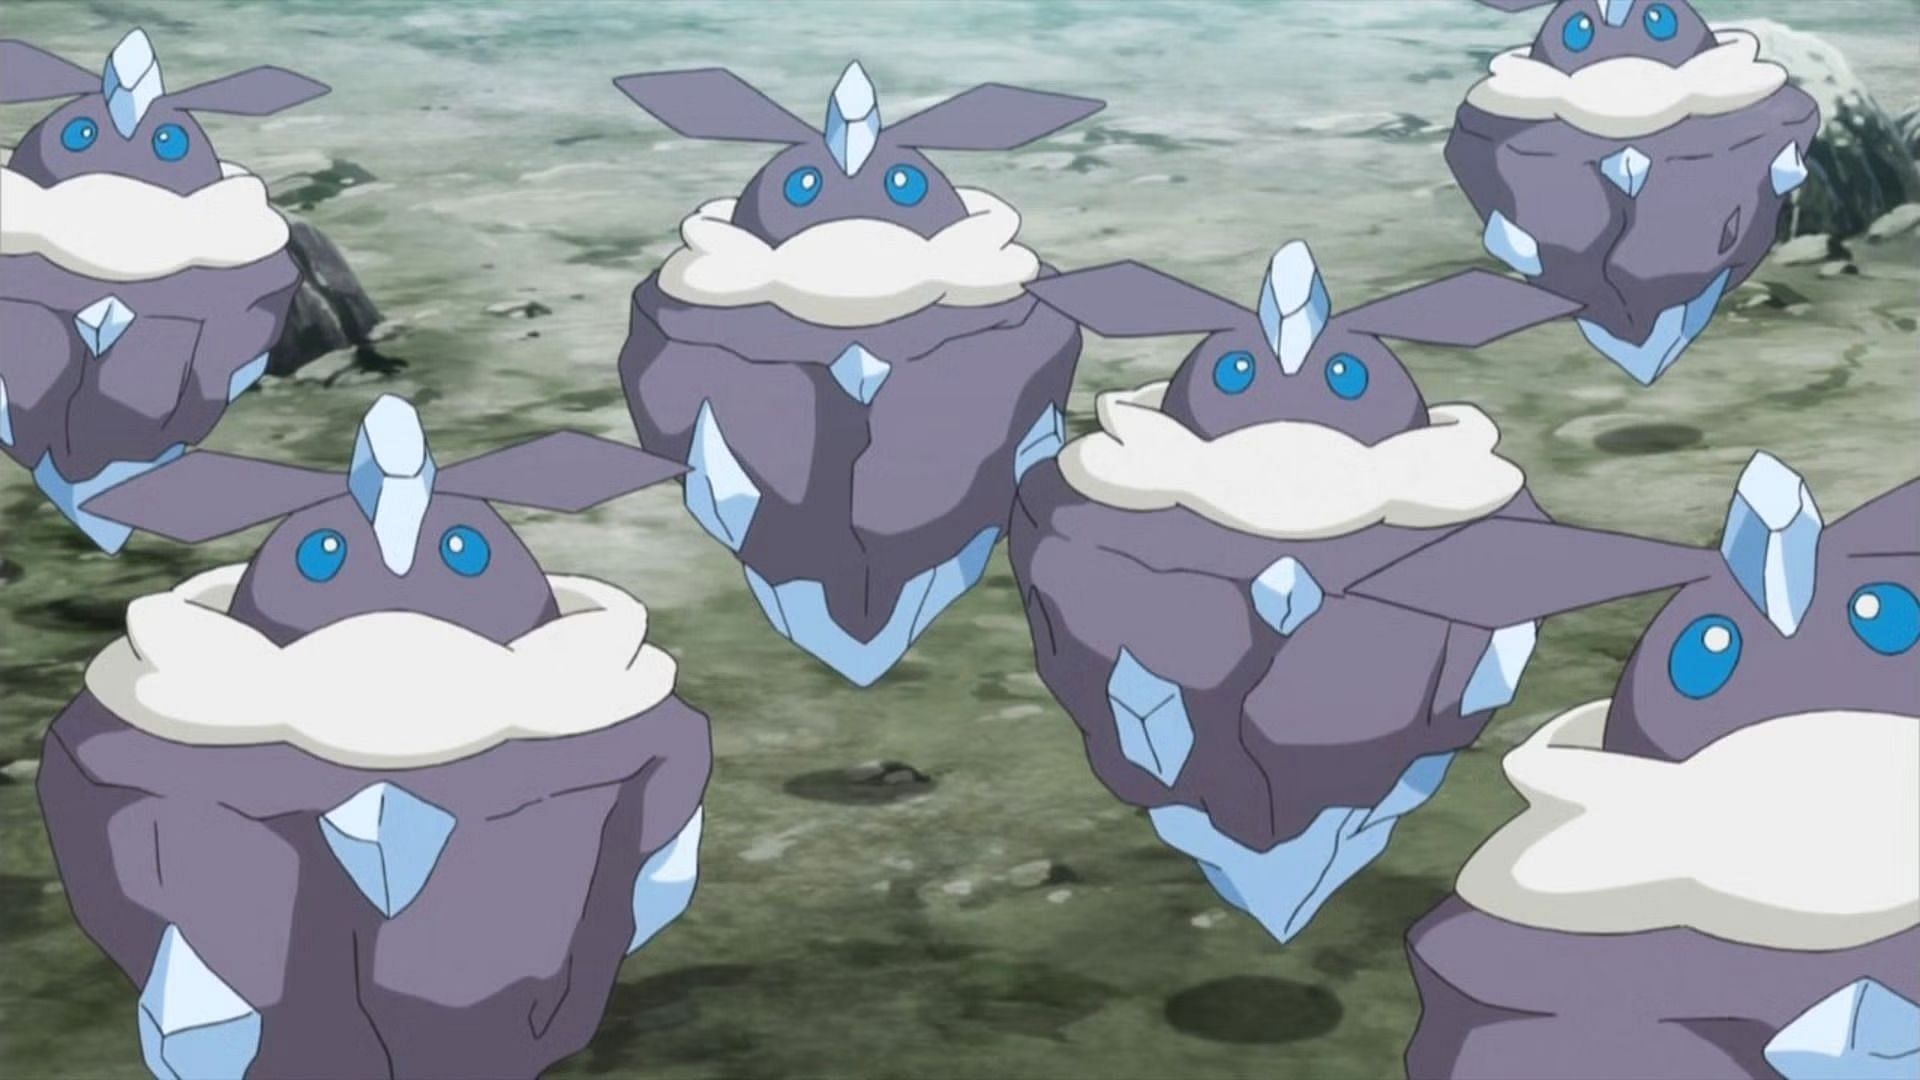 Carbink as seen in the anime